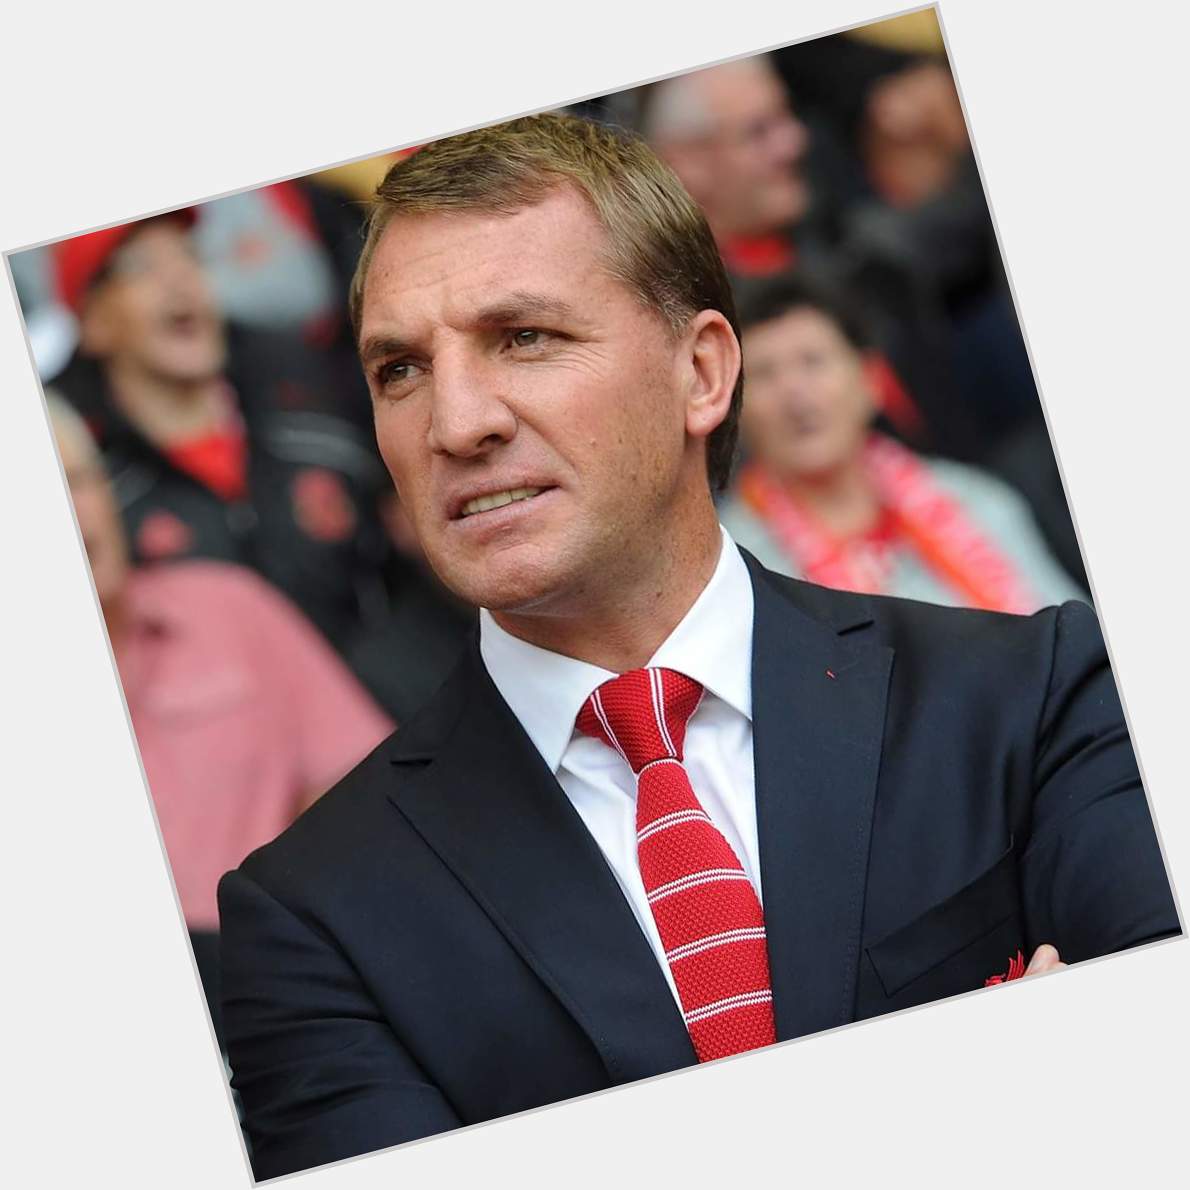 Happy birthday to Brendan Rodgers!! U have come through more criticism but u have turned the corner. 